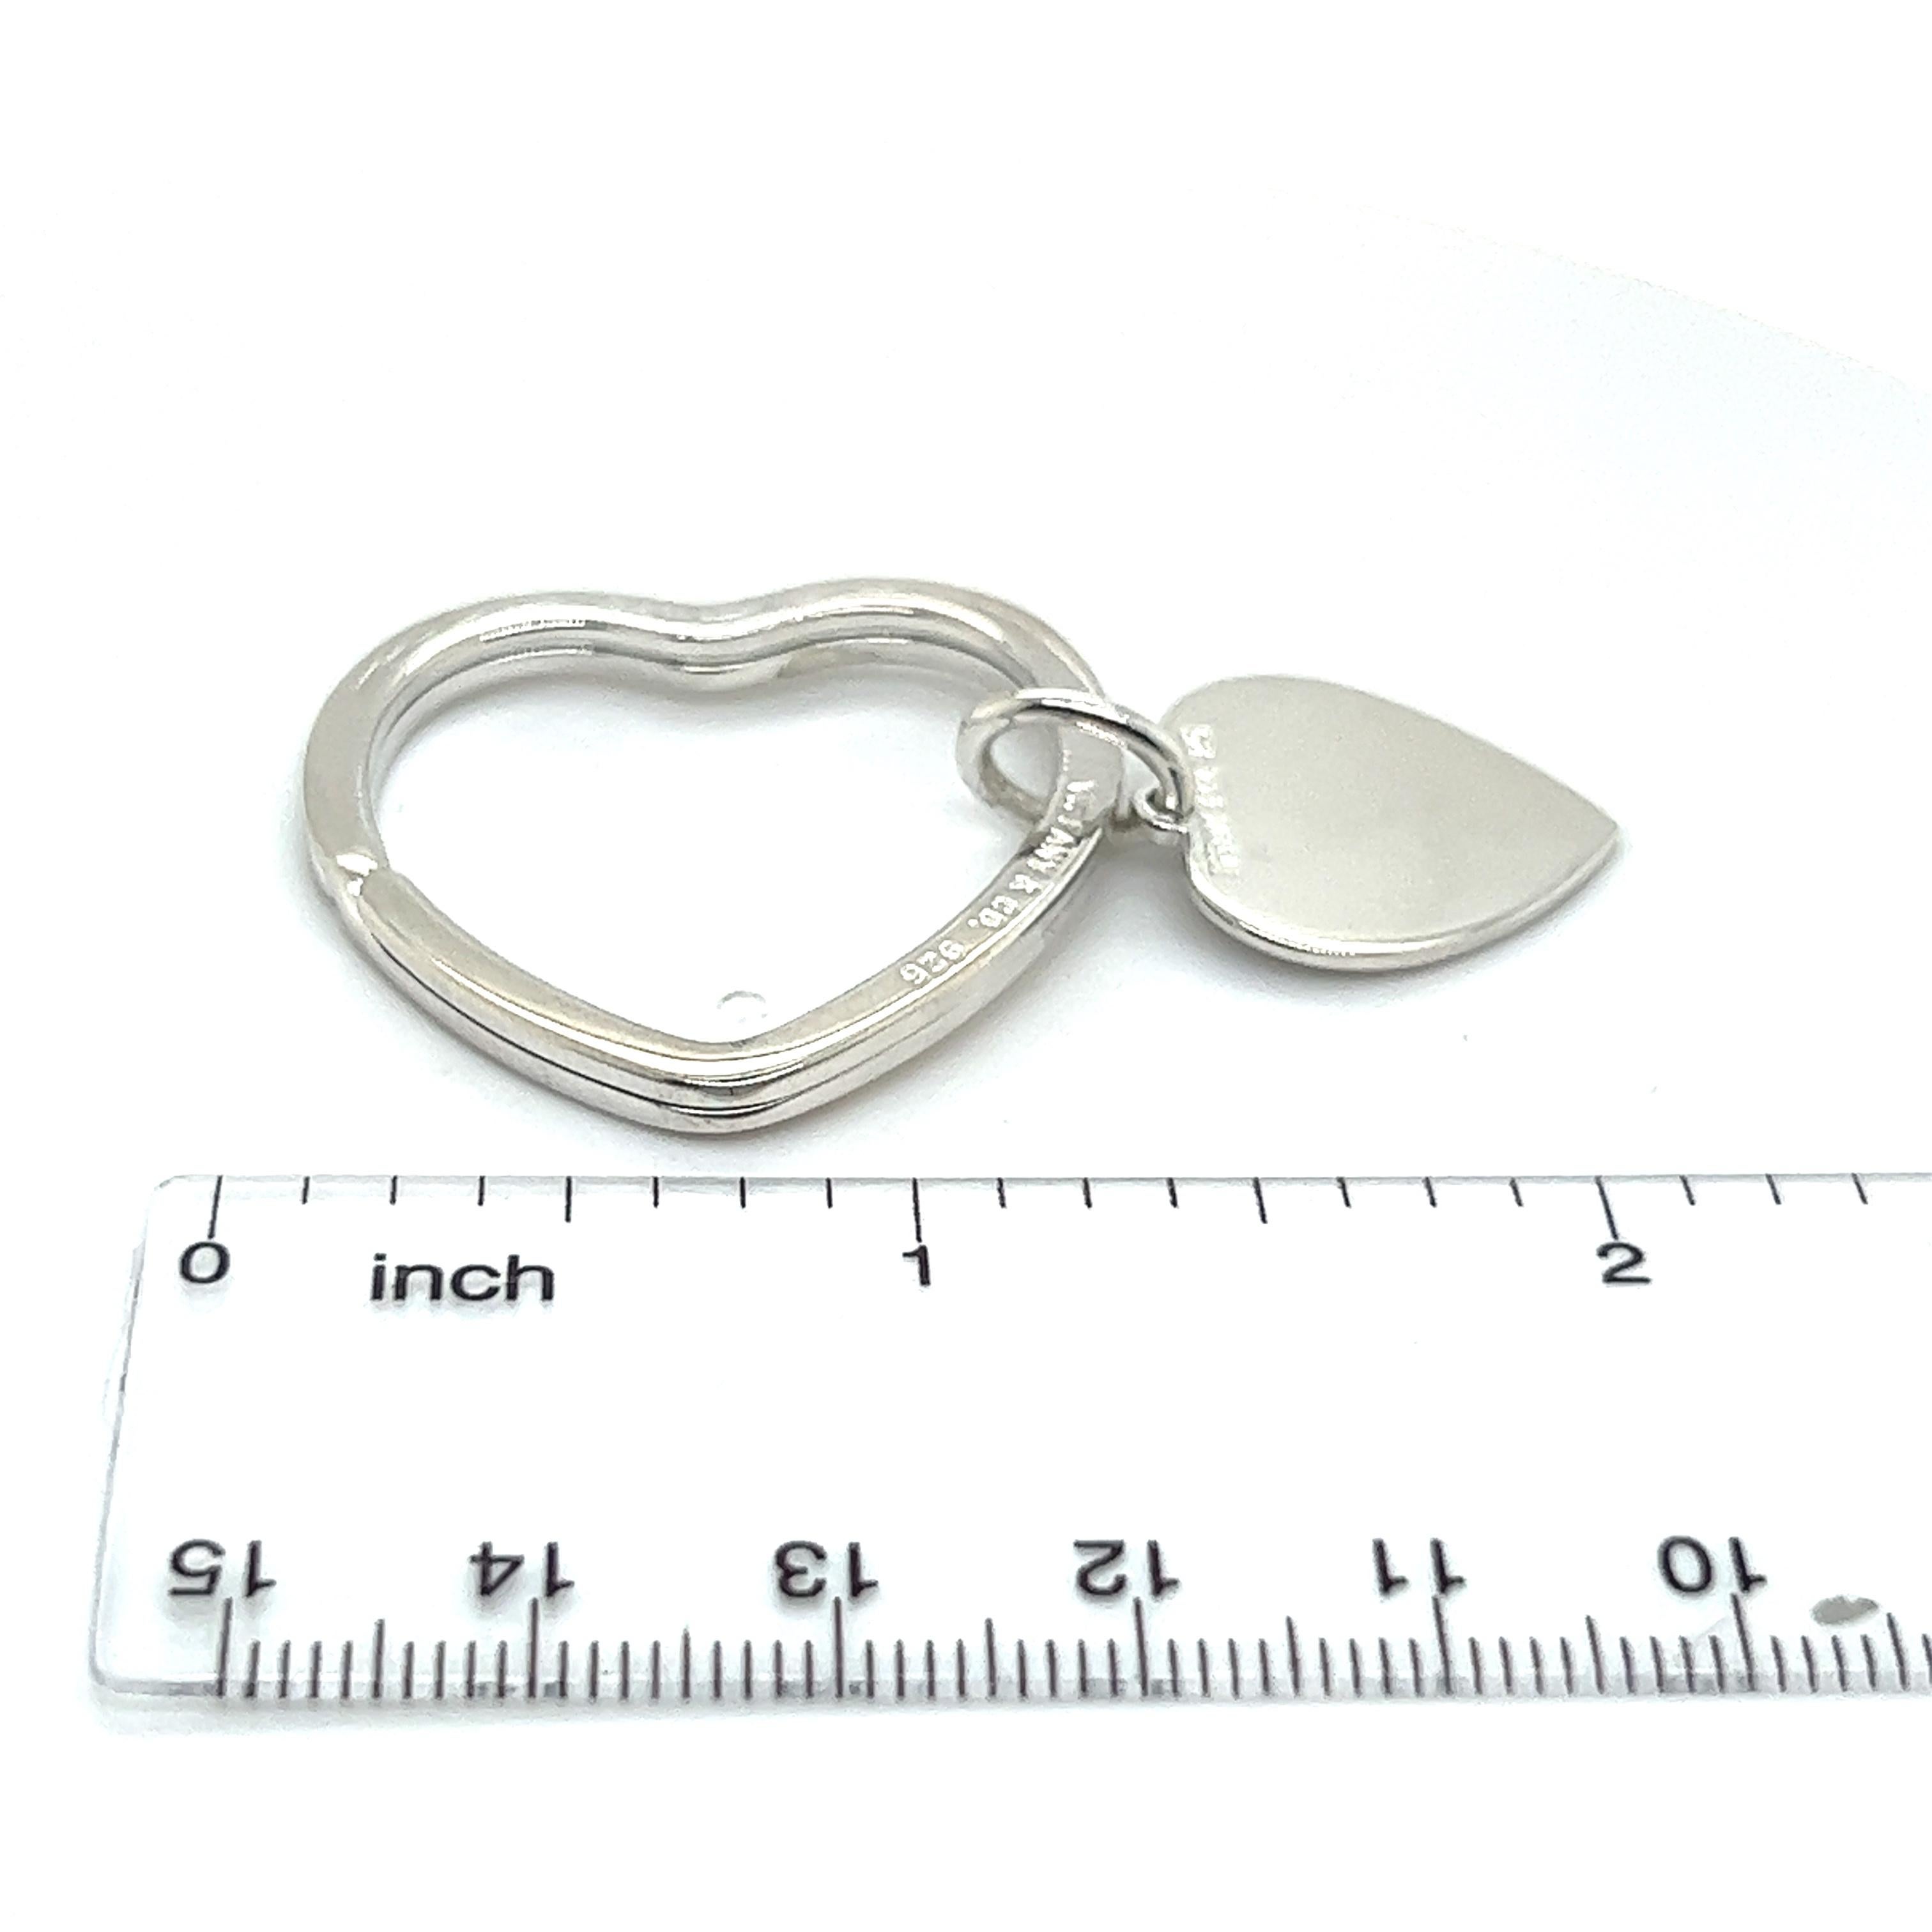 Tiffany & Co Estate Heart Keychain Silver TIF420

TRUSTED SELLER SINCE 2002

PLEASE SEE OUR HUNDREDS OF POSITIVE FEEDBACKS FROM OUR CLIENTS!!

FREE SHIPPING

DETAILS
Style: Heart
Metal: Sterling Silver
Weight: 10 Grams

This Authentic Tiffany & Co.